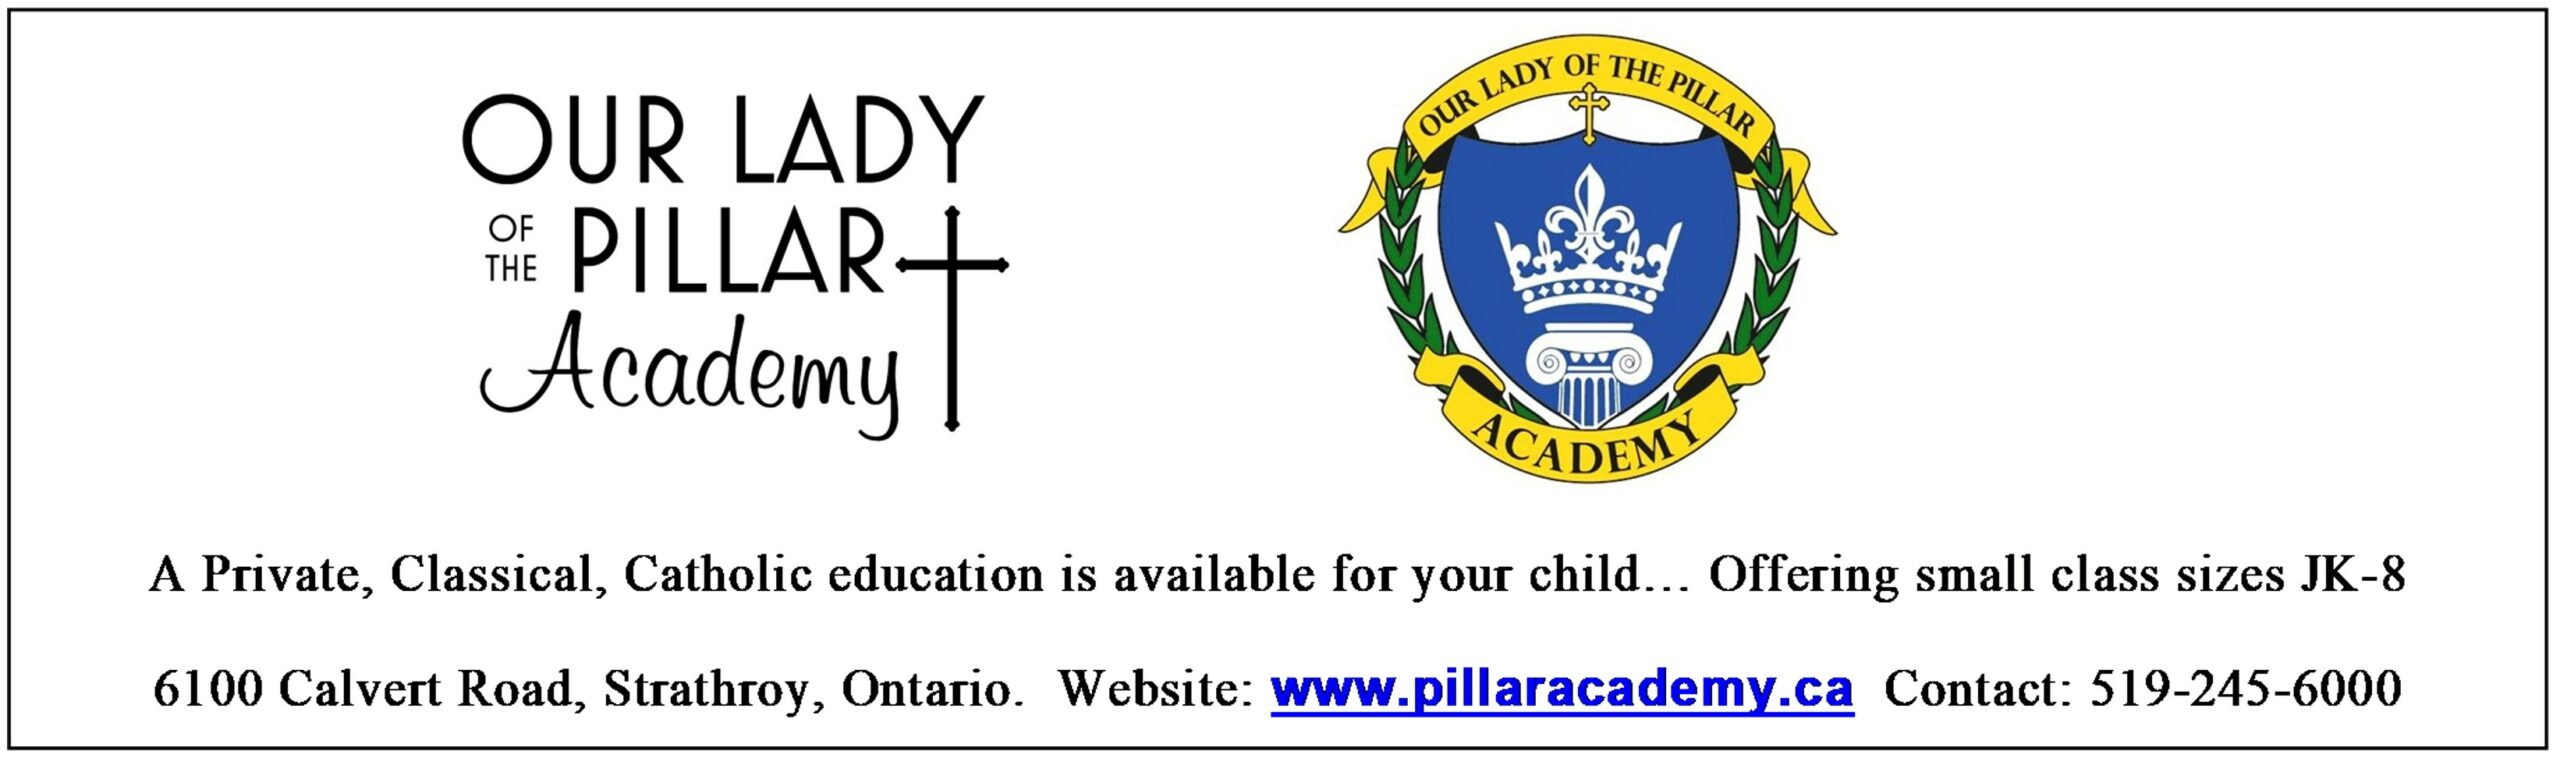 Our Lady of the Pillar Academy